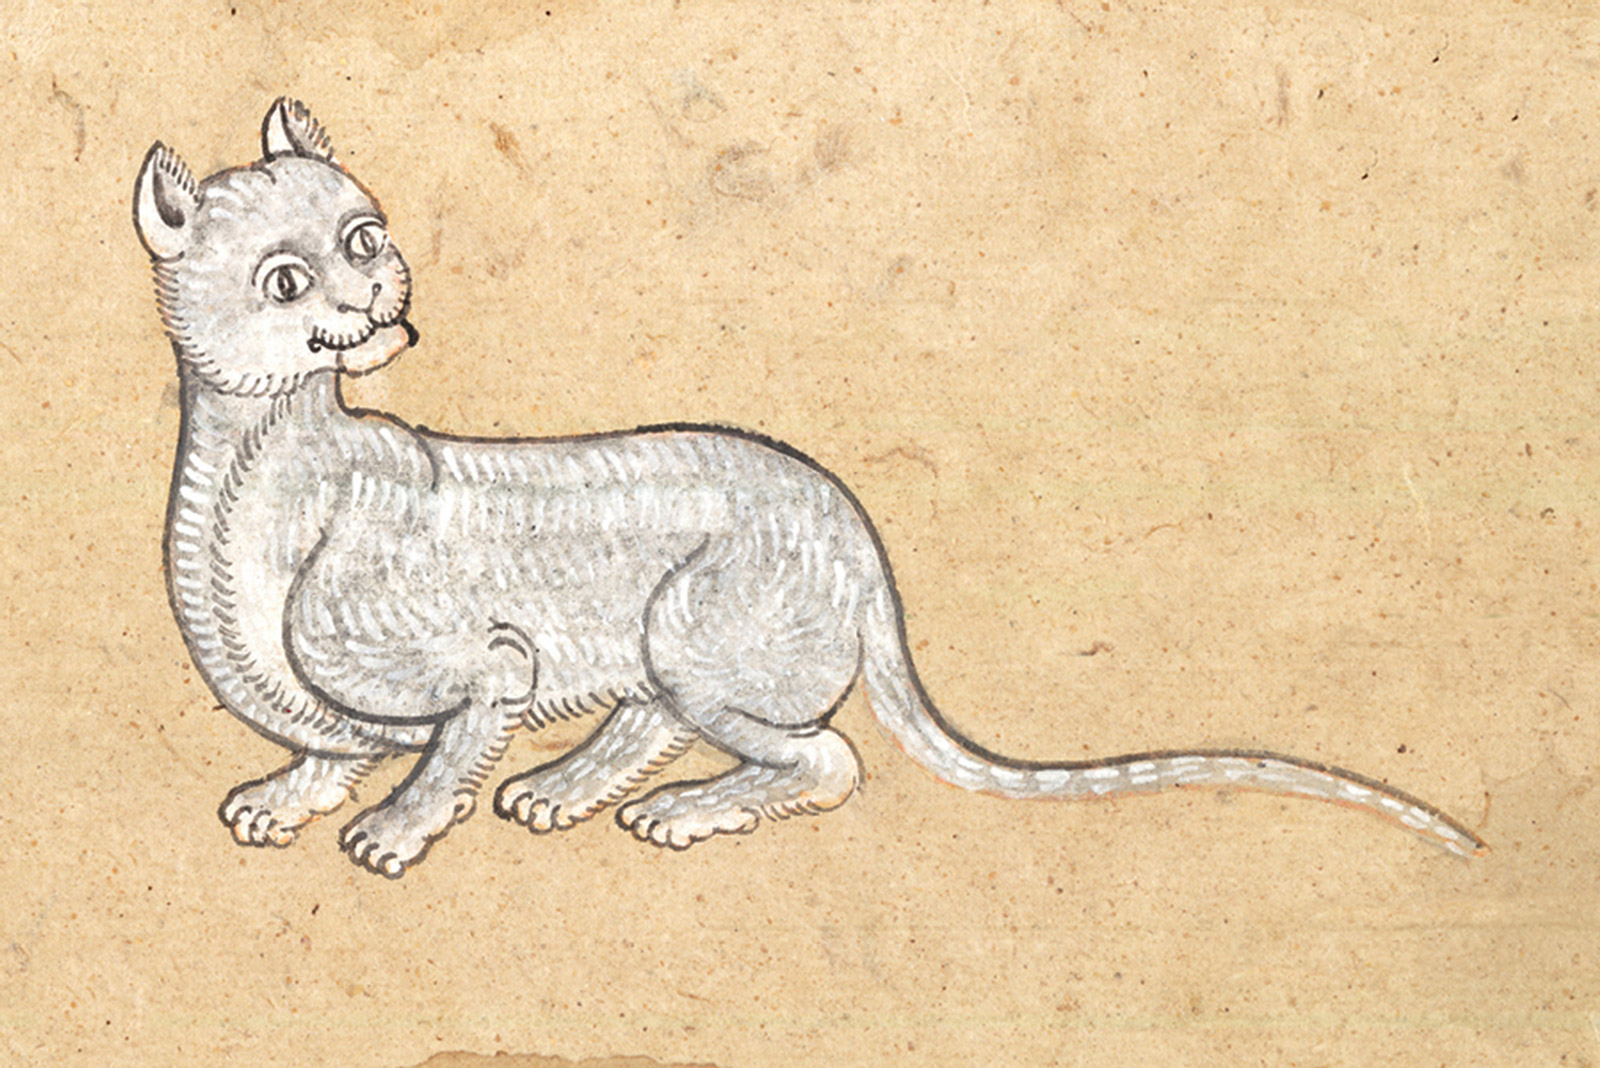 An illustration of a Maaleht (Flower) or Dork Lao (Lao Flower) cat from a mid-nineteenth-century manuscript titled “Tamra Maew.” The accompanying caption reads: “Grace of the flower, its body evenly colored,
Fur like the lao flower, smooth.
Fur roots a cloudy gray, off-white
Eyes, like dewdrops on a lotus.”